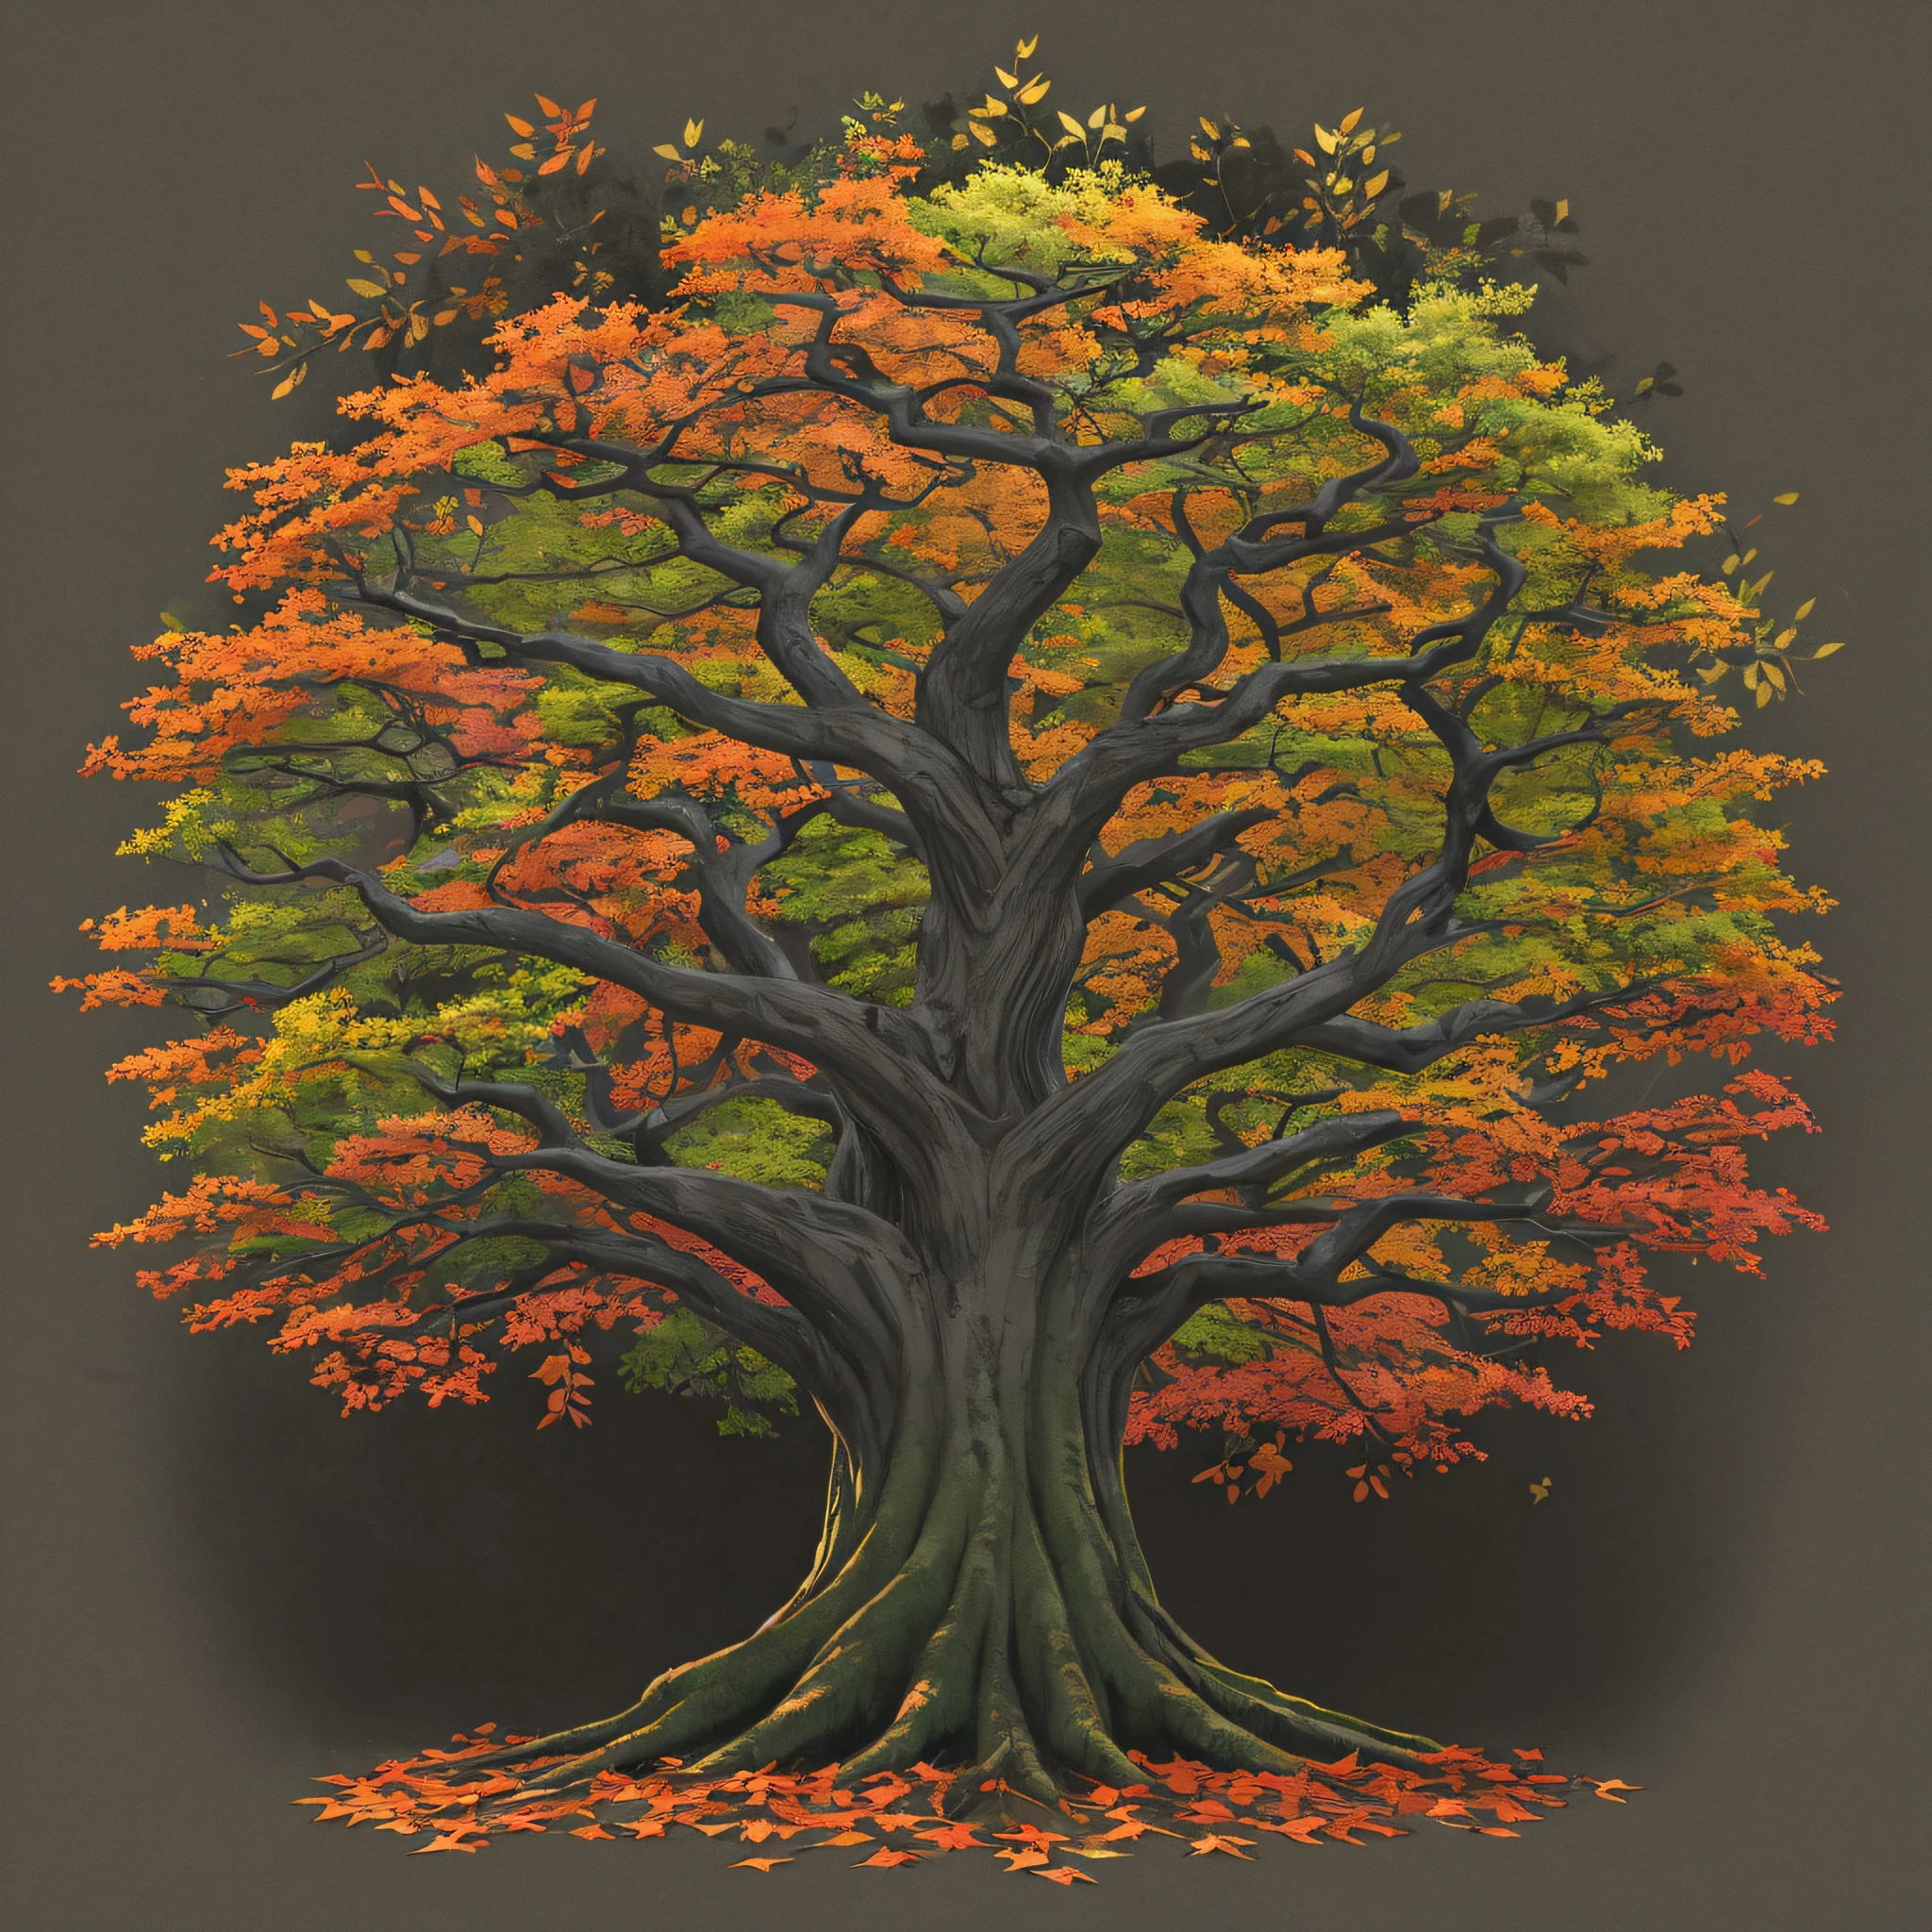 tree of life, leafy tree, thick trunk, with colorful leaves and flowers, dark background, nocturnal, gray.